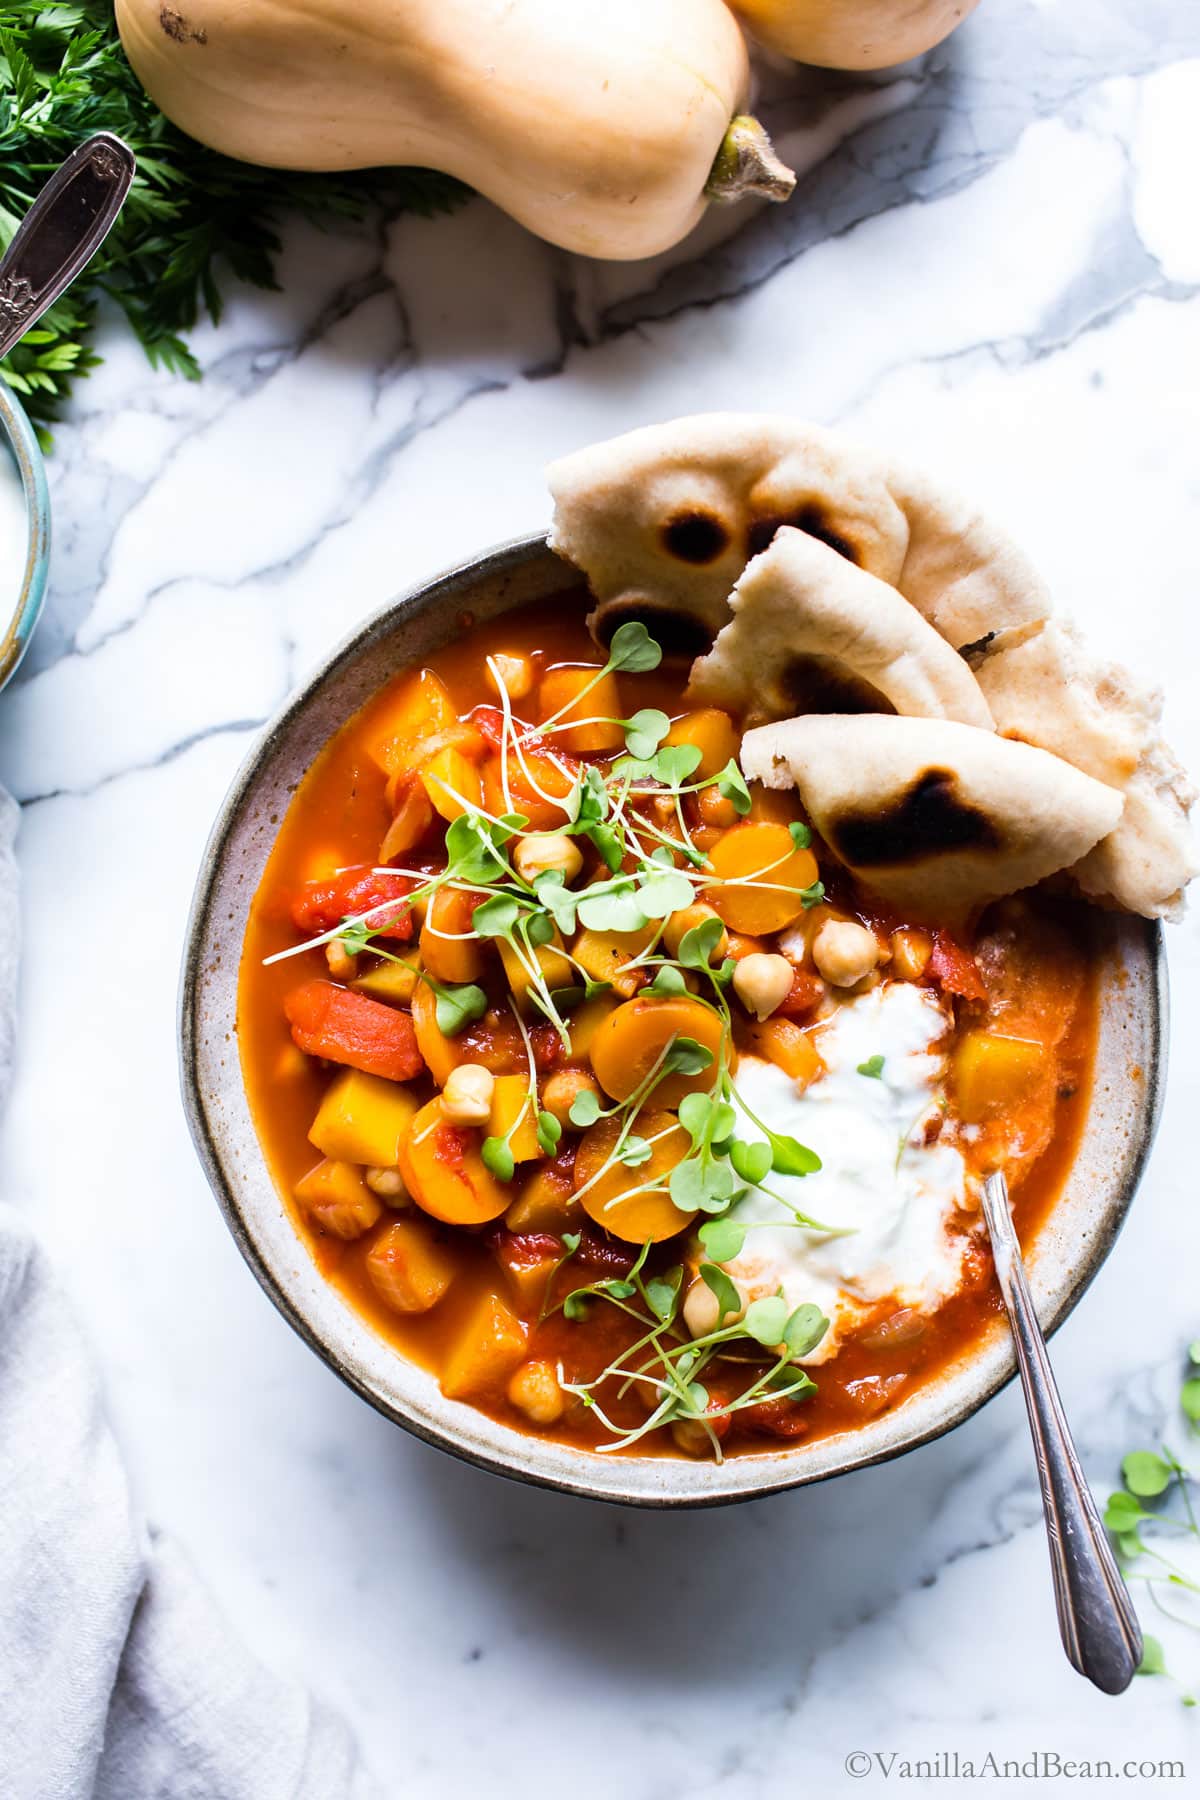 Moroccan Butternut Squash Stew topped with yogurt, microgreens and shared with Naan in a bowl.